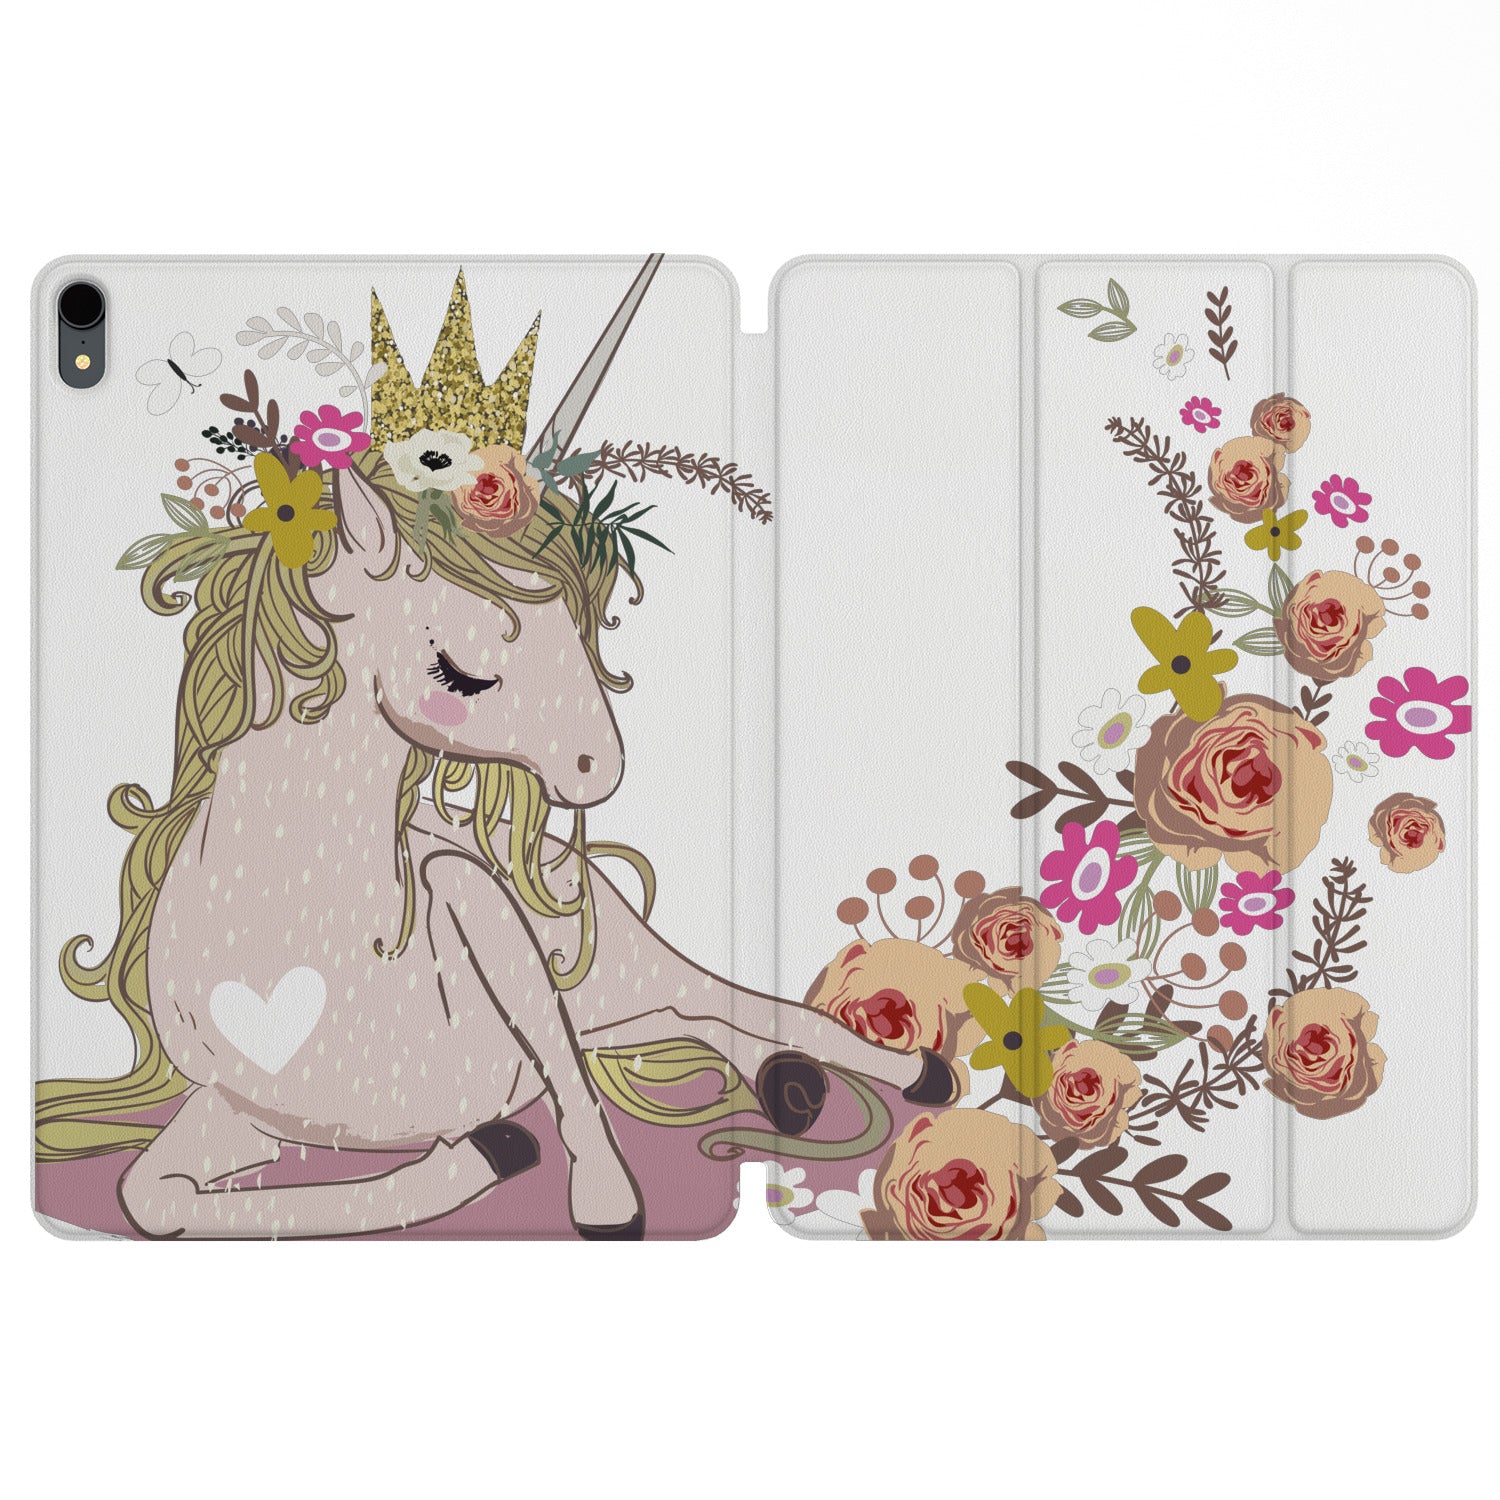 Lex Altern Magnetic iPad Case Adorable Unicorn for your Apple tablet.